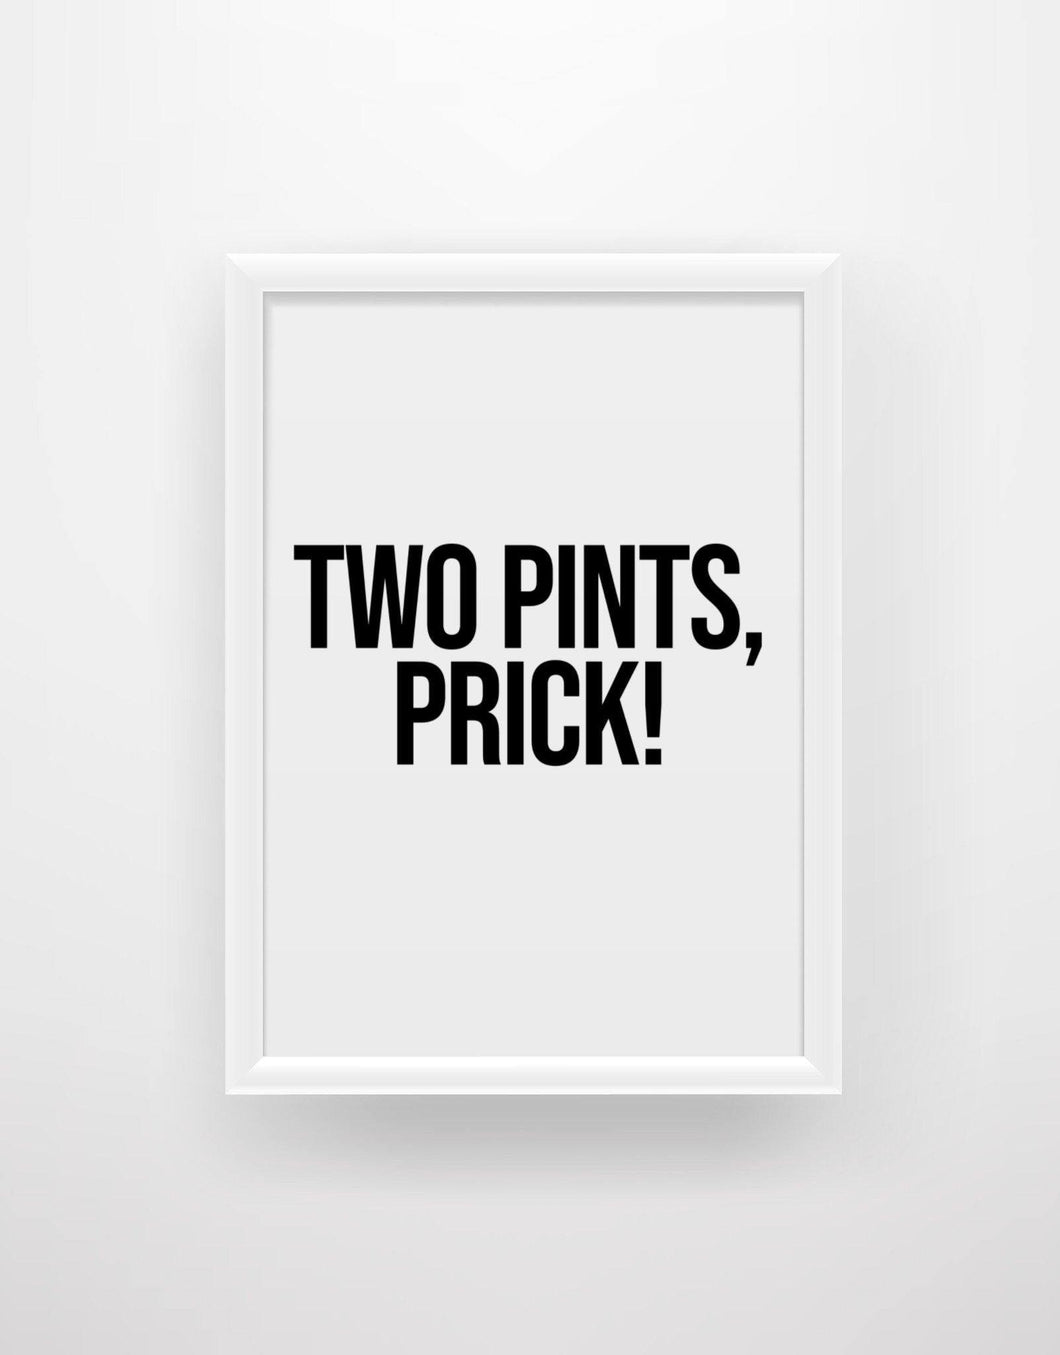 Two Pints, Prick! - Still Game Quote Print - Chic Prints